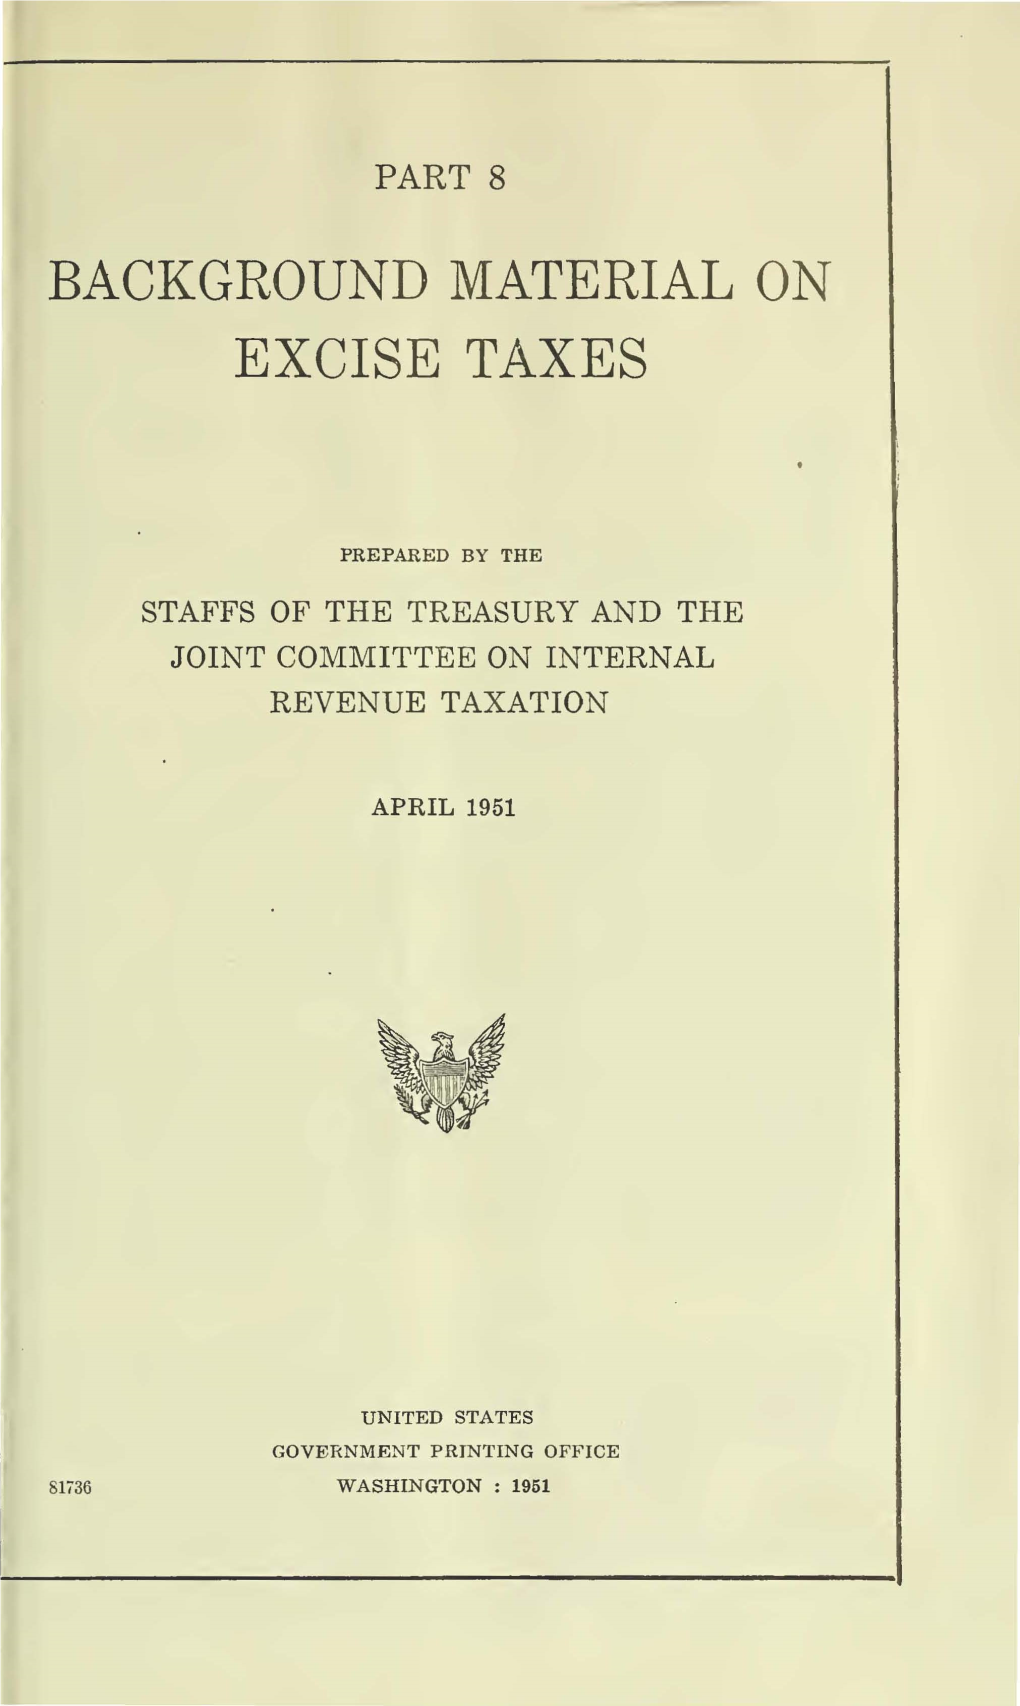 Background Material on Excise Taxes